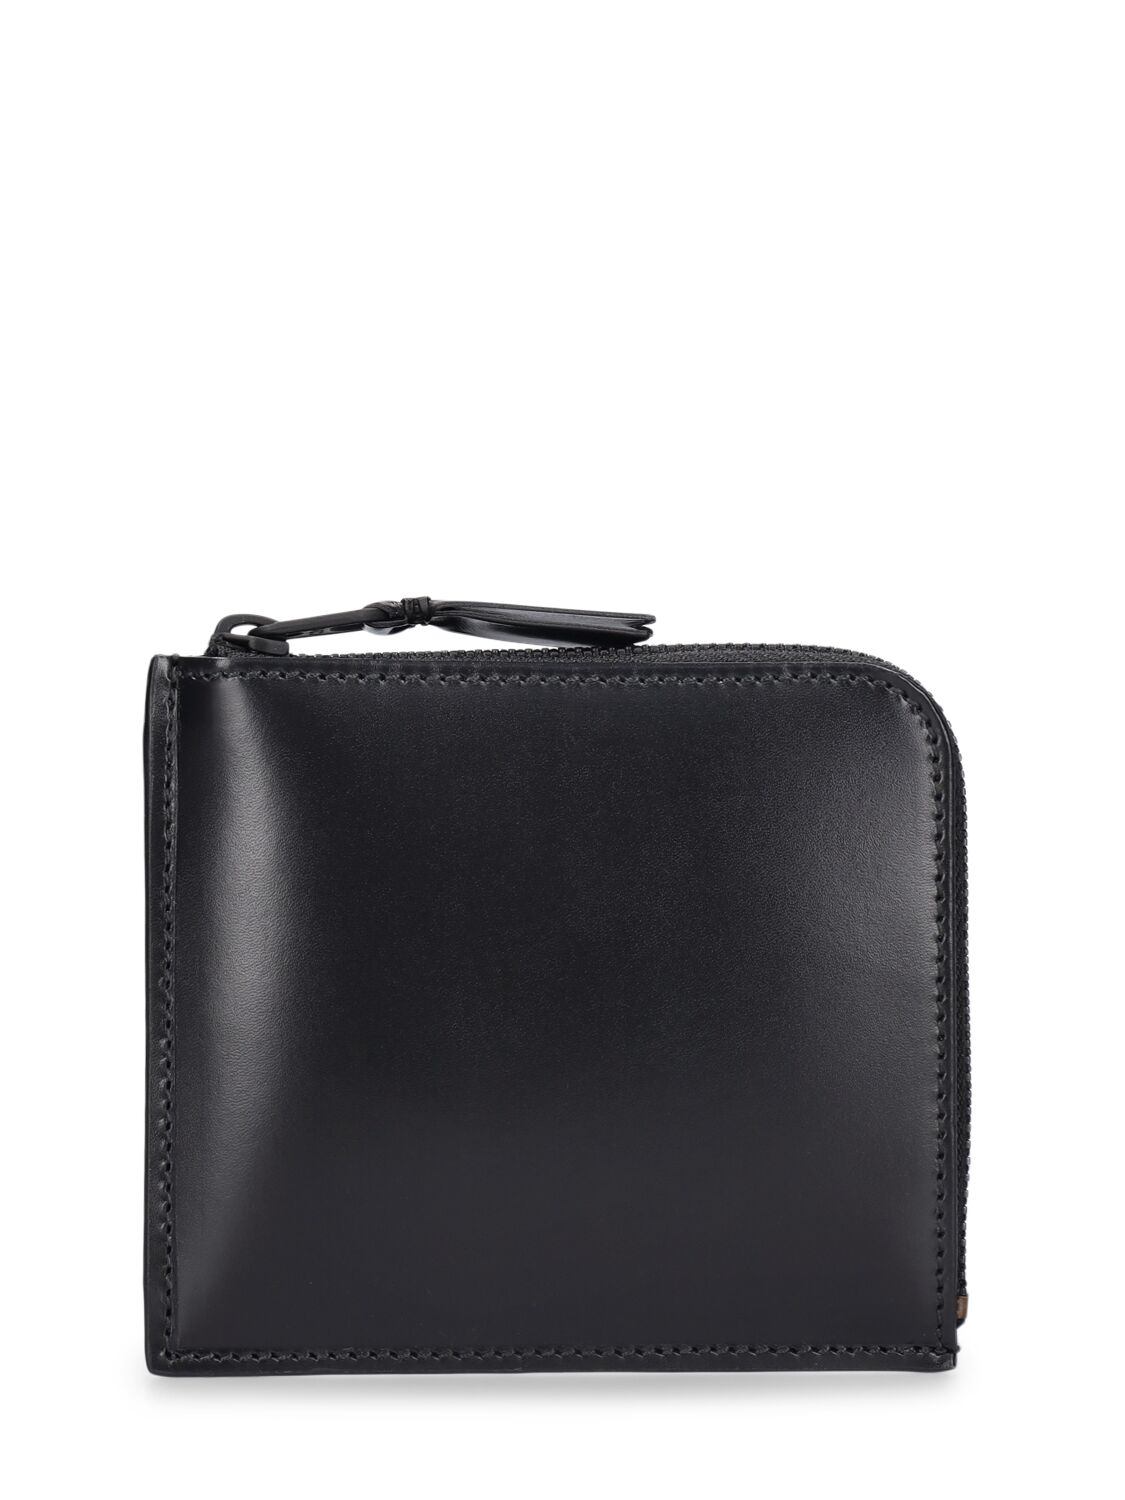 Image of Very Black Leather Wallet